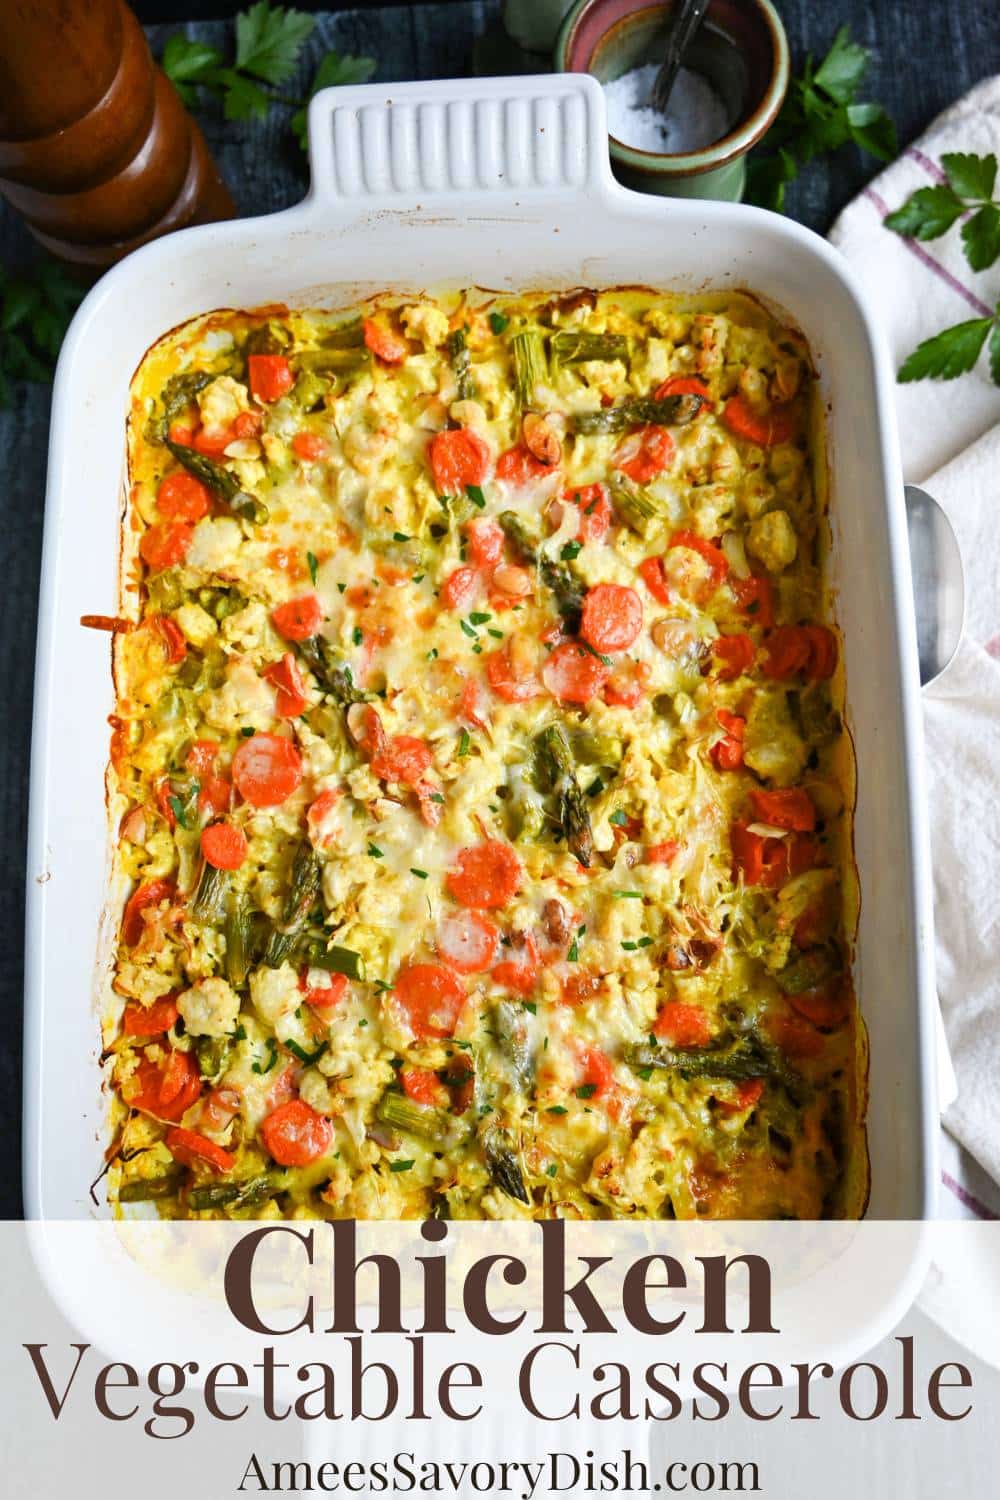 This Chicken Vegetable Casserole recipe is a healthier twist on a classic! Made with lean ground chicken, mixed vegetables, almonds, and low-fat white cheddar cheese. via @Ameessavorydish